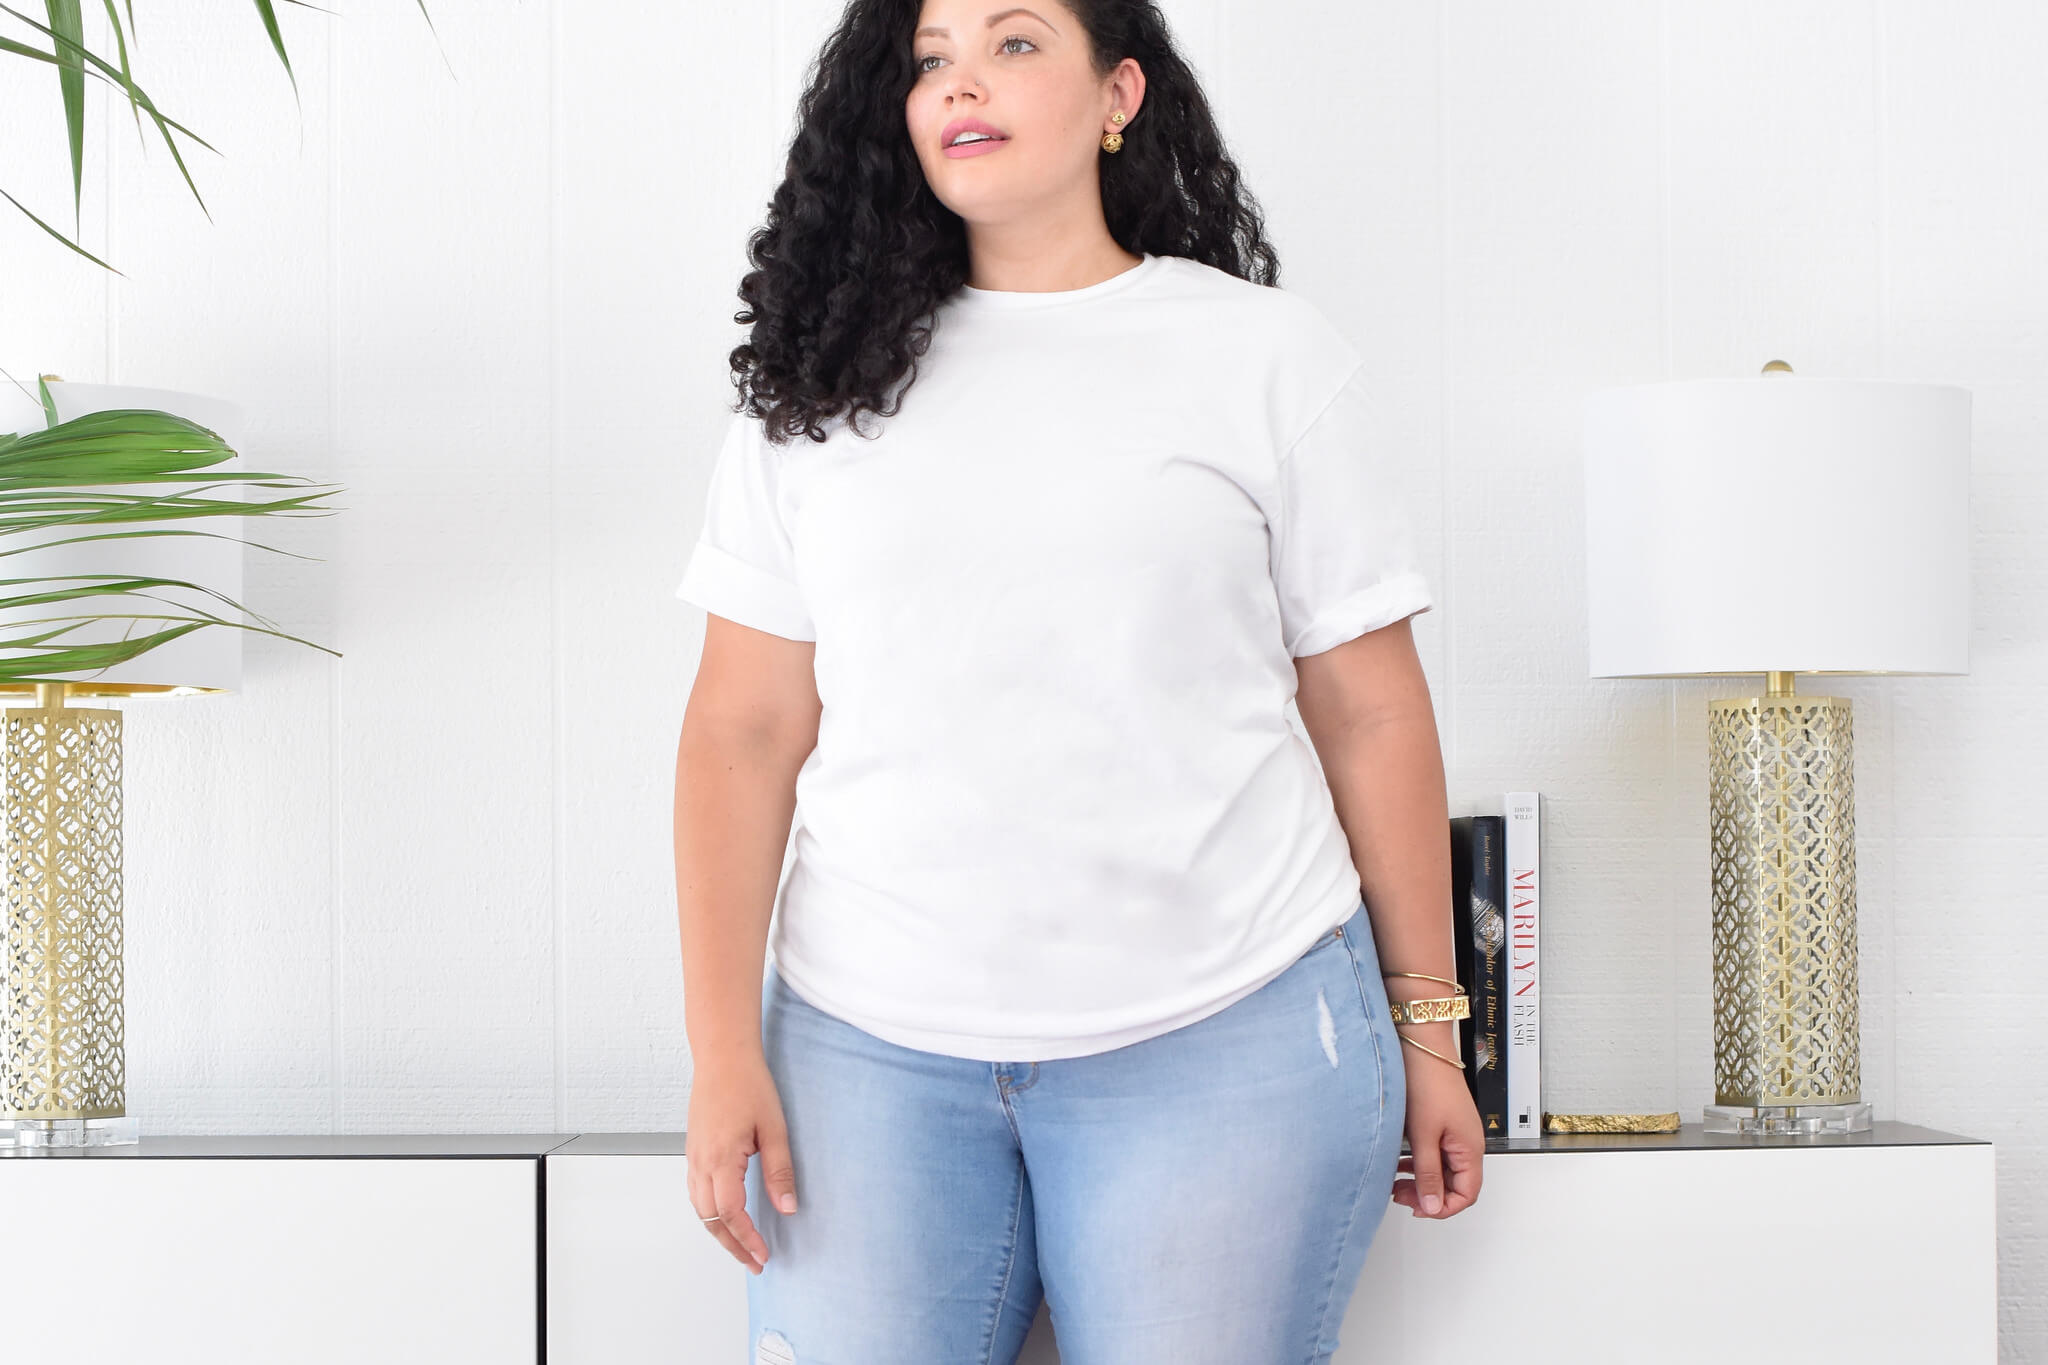 Unconditional Self-Love and Beauty at Every Size via @GirlWithCurves